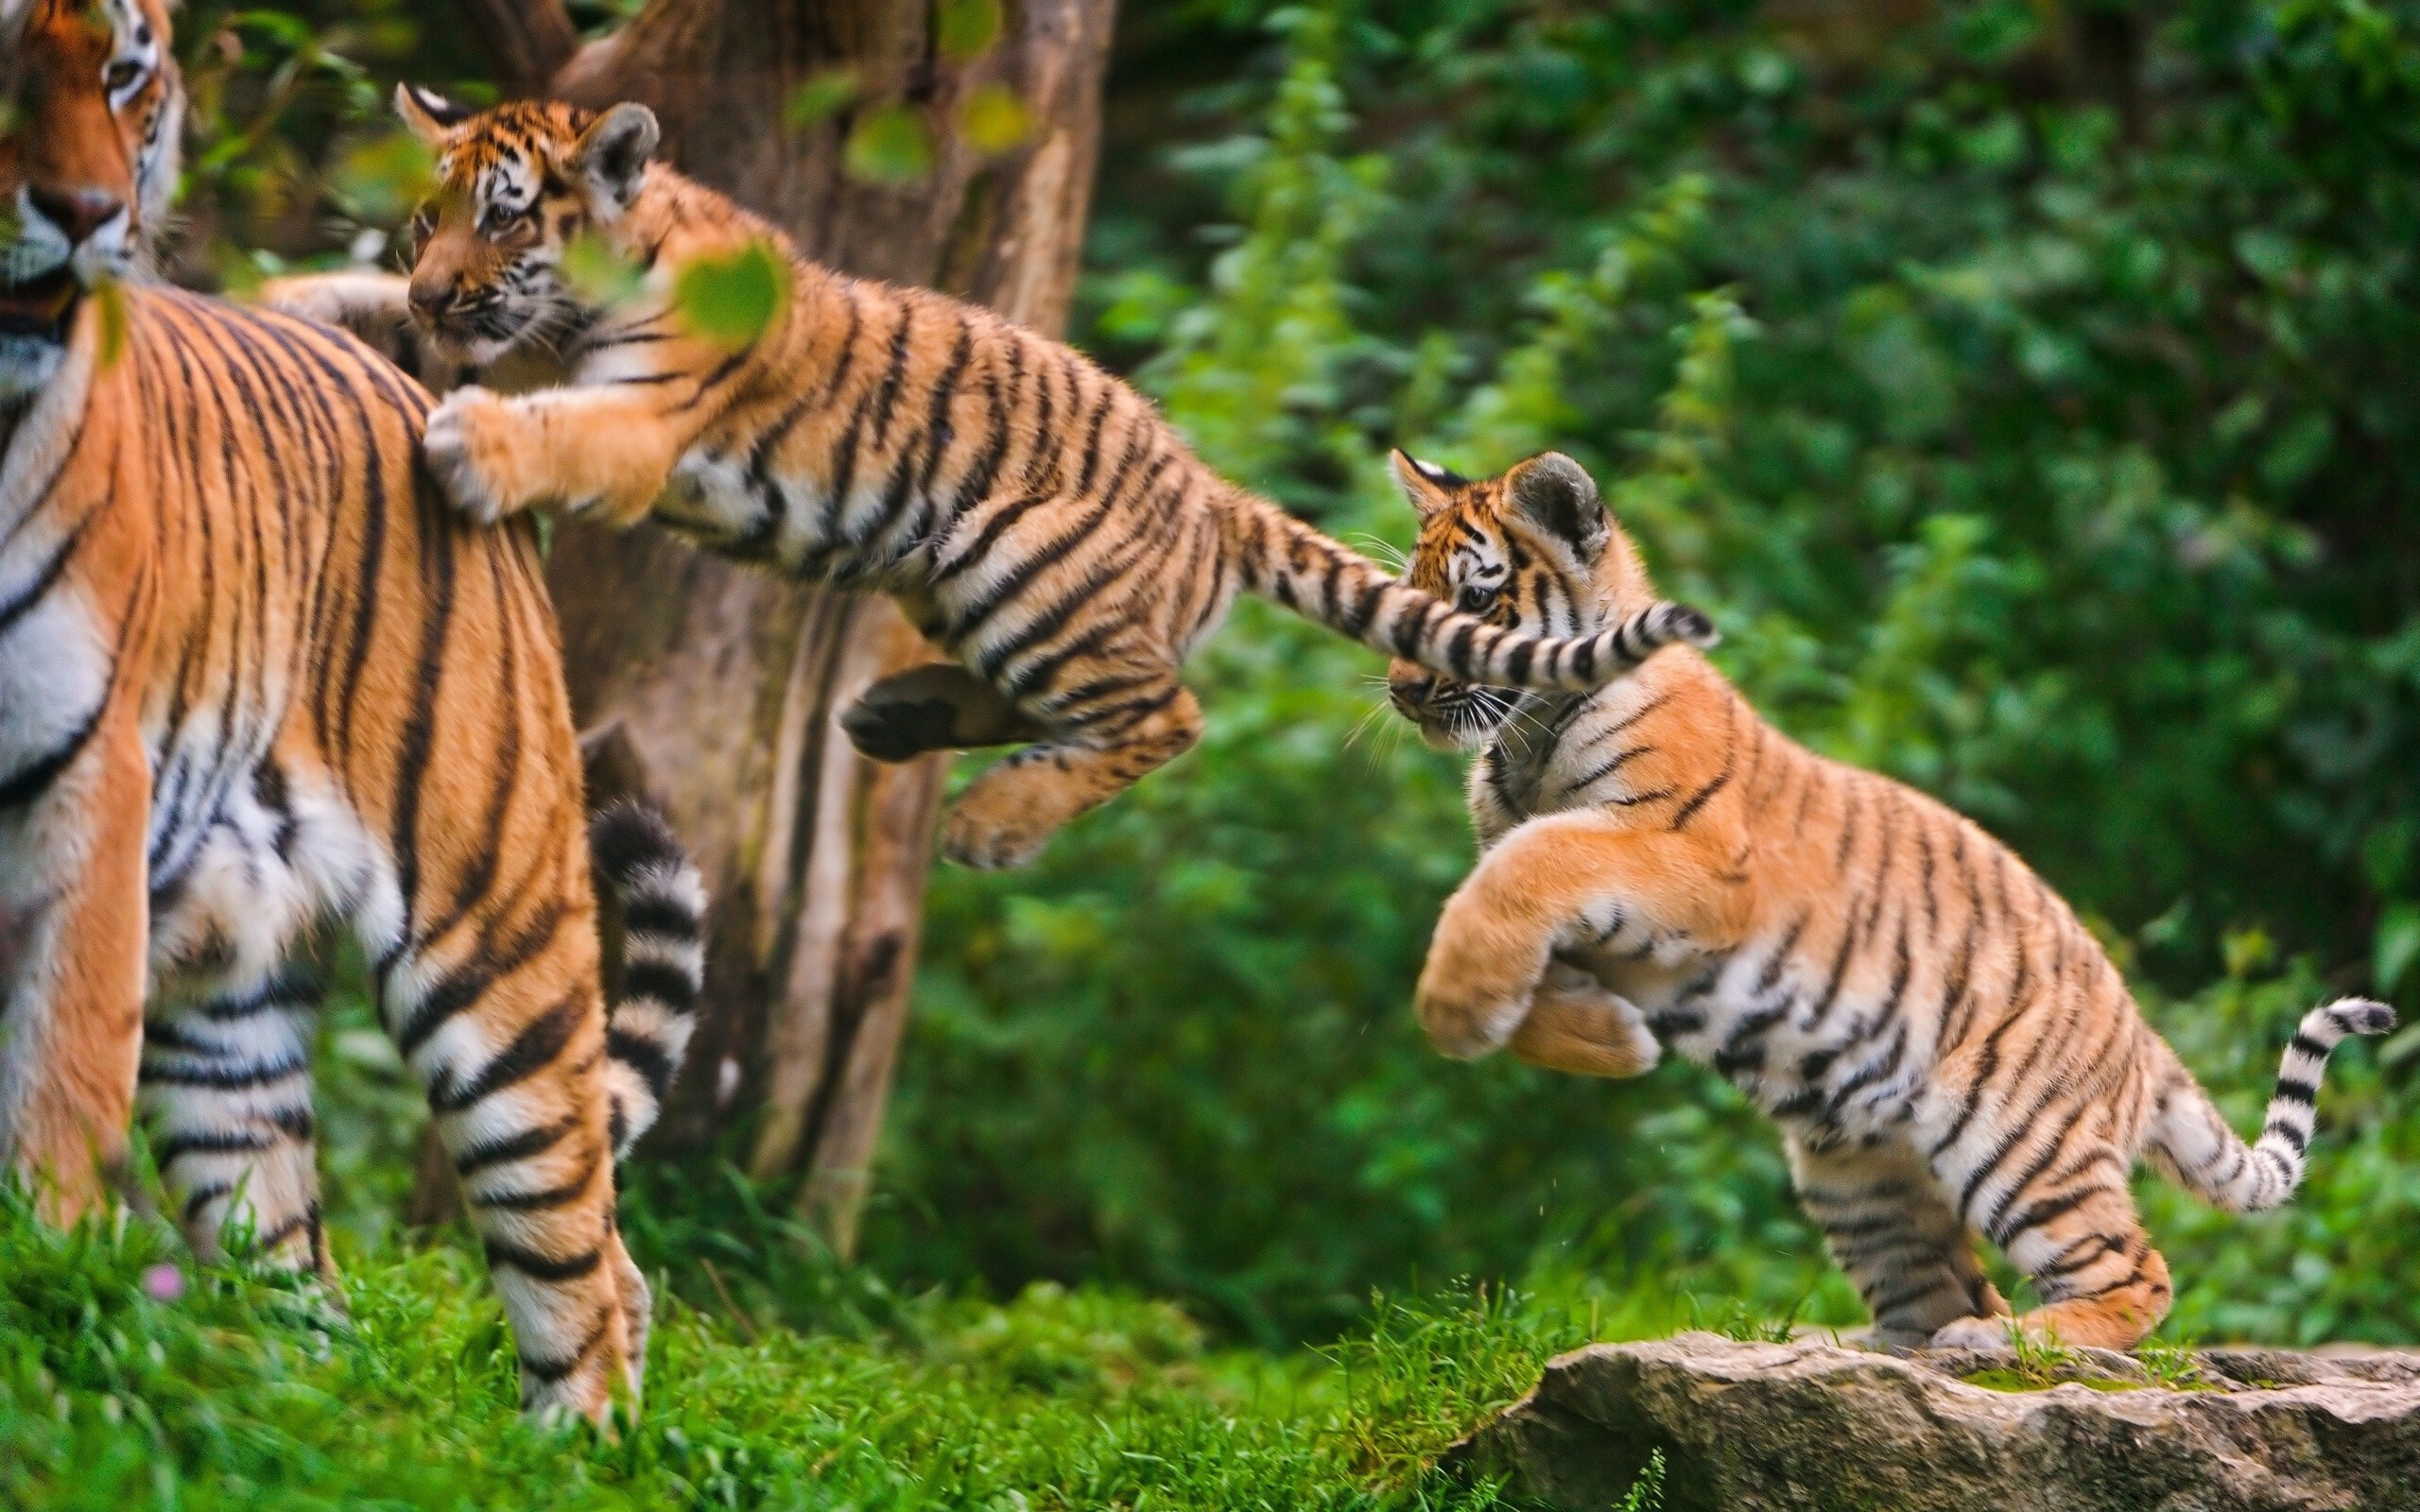 Tiger Cub: Its pelage coloration varies between shades of orange with a white underside and distinctive vertical black stripes. 2560x1600 HD Background.